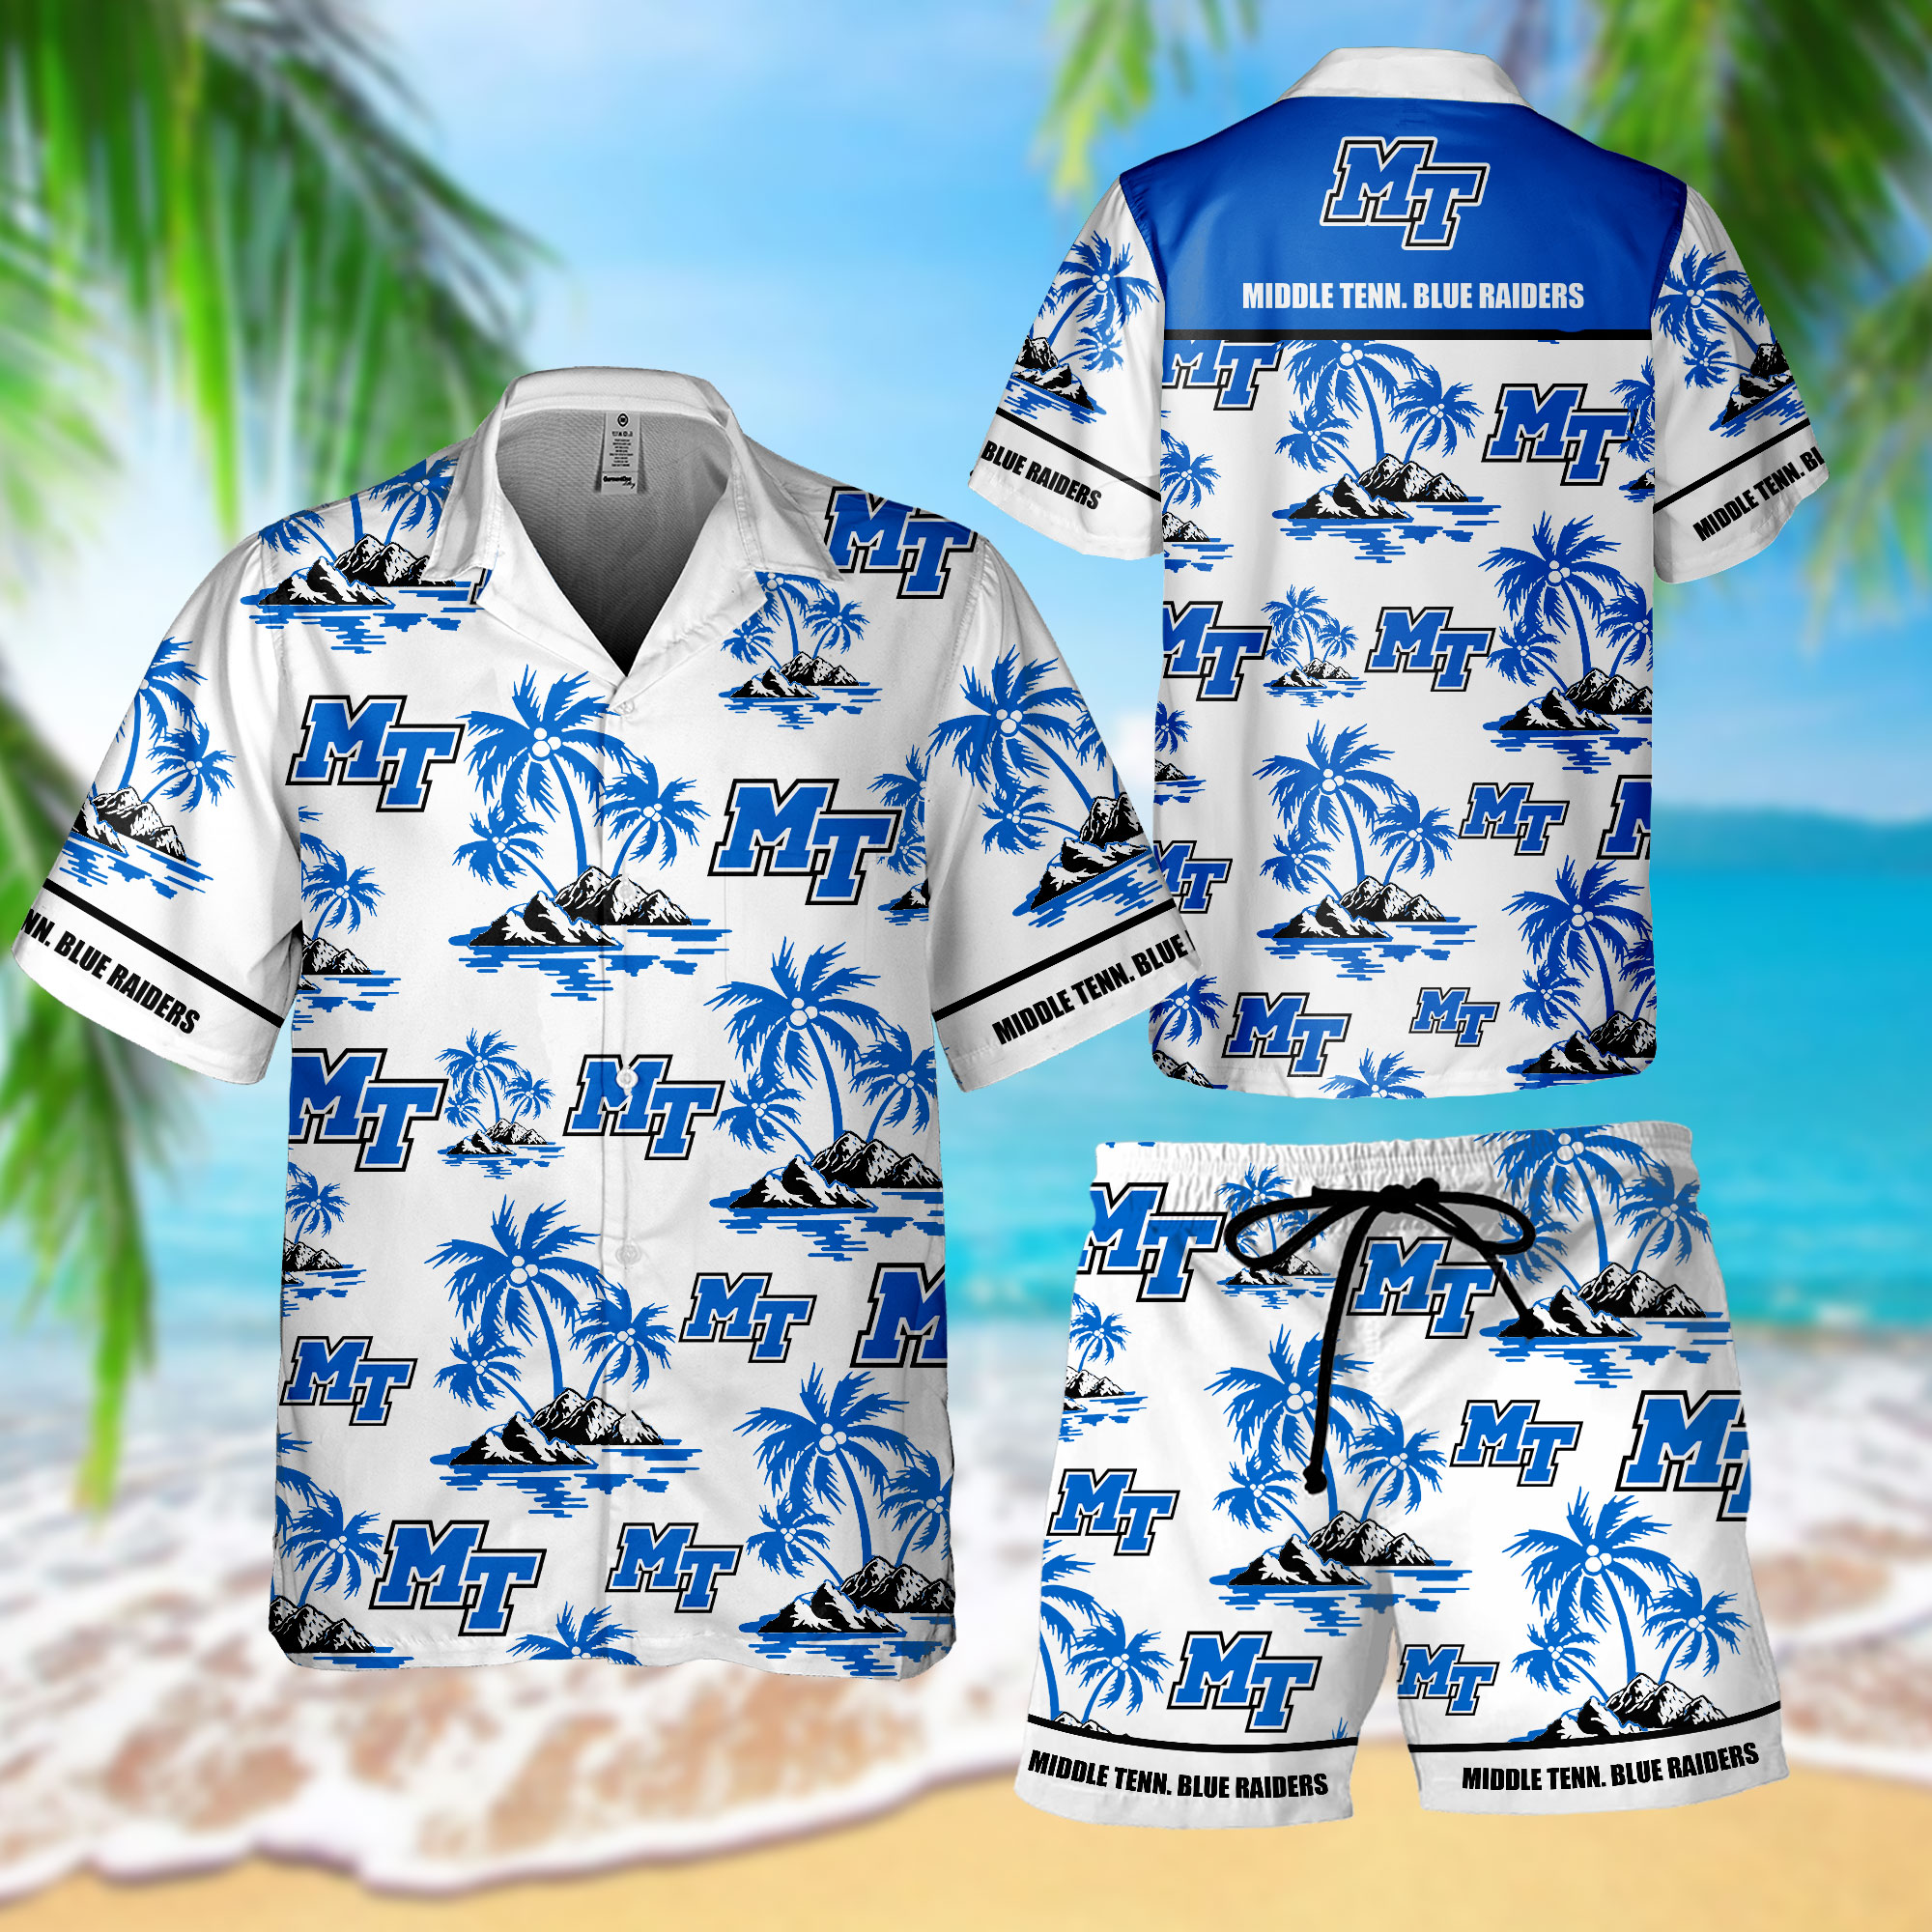 Let me show you about some combo hawaiian shirt so cool in this weather 85